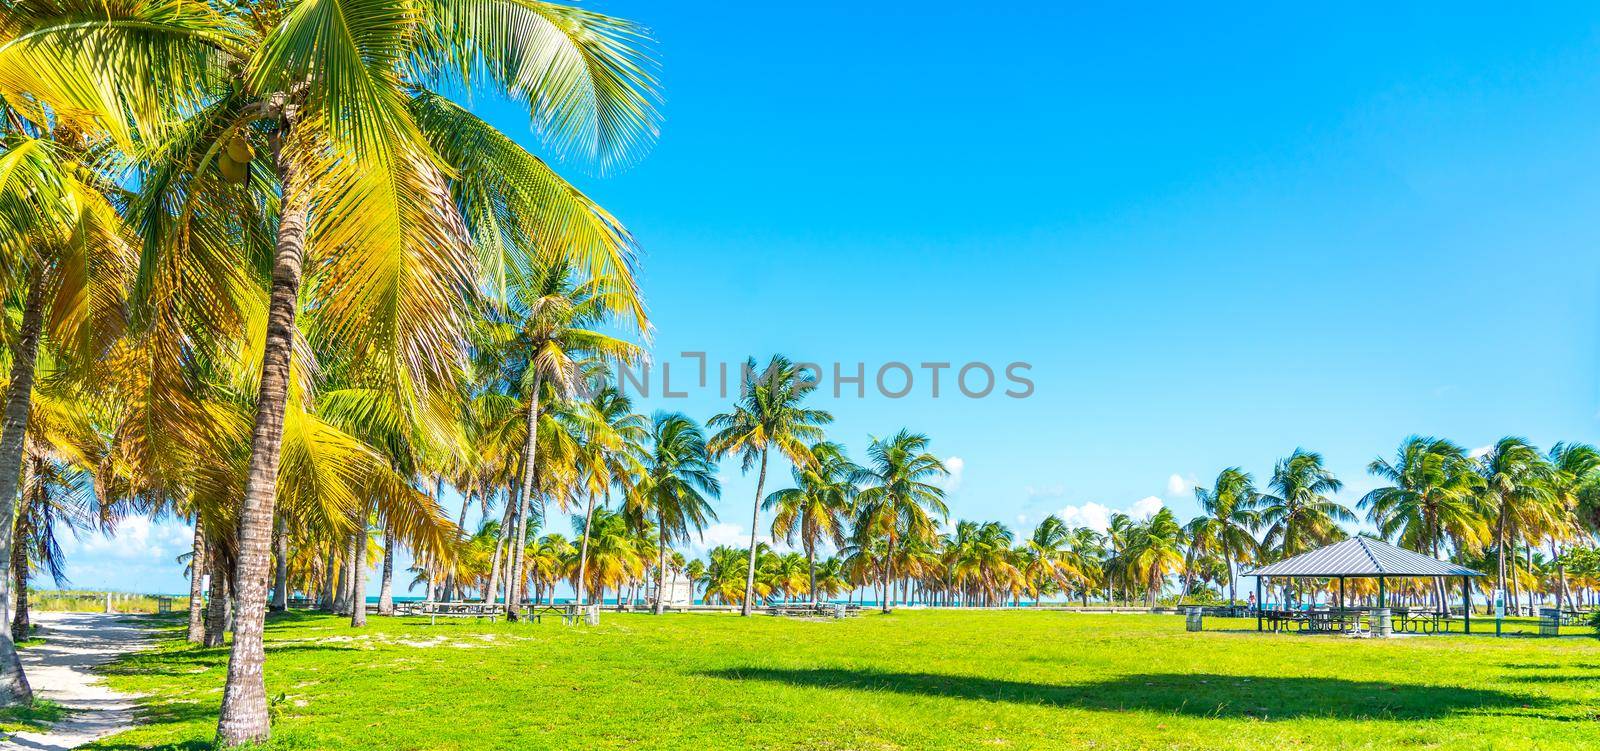 Beautiful Crandon Park Beach with rental cabanas located in Key Biscayne in Miami